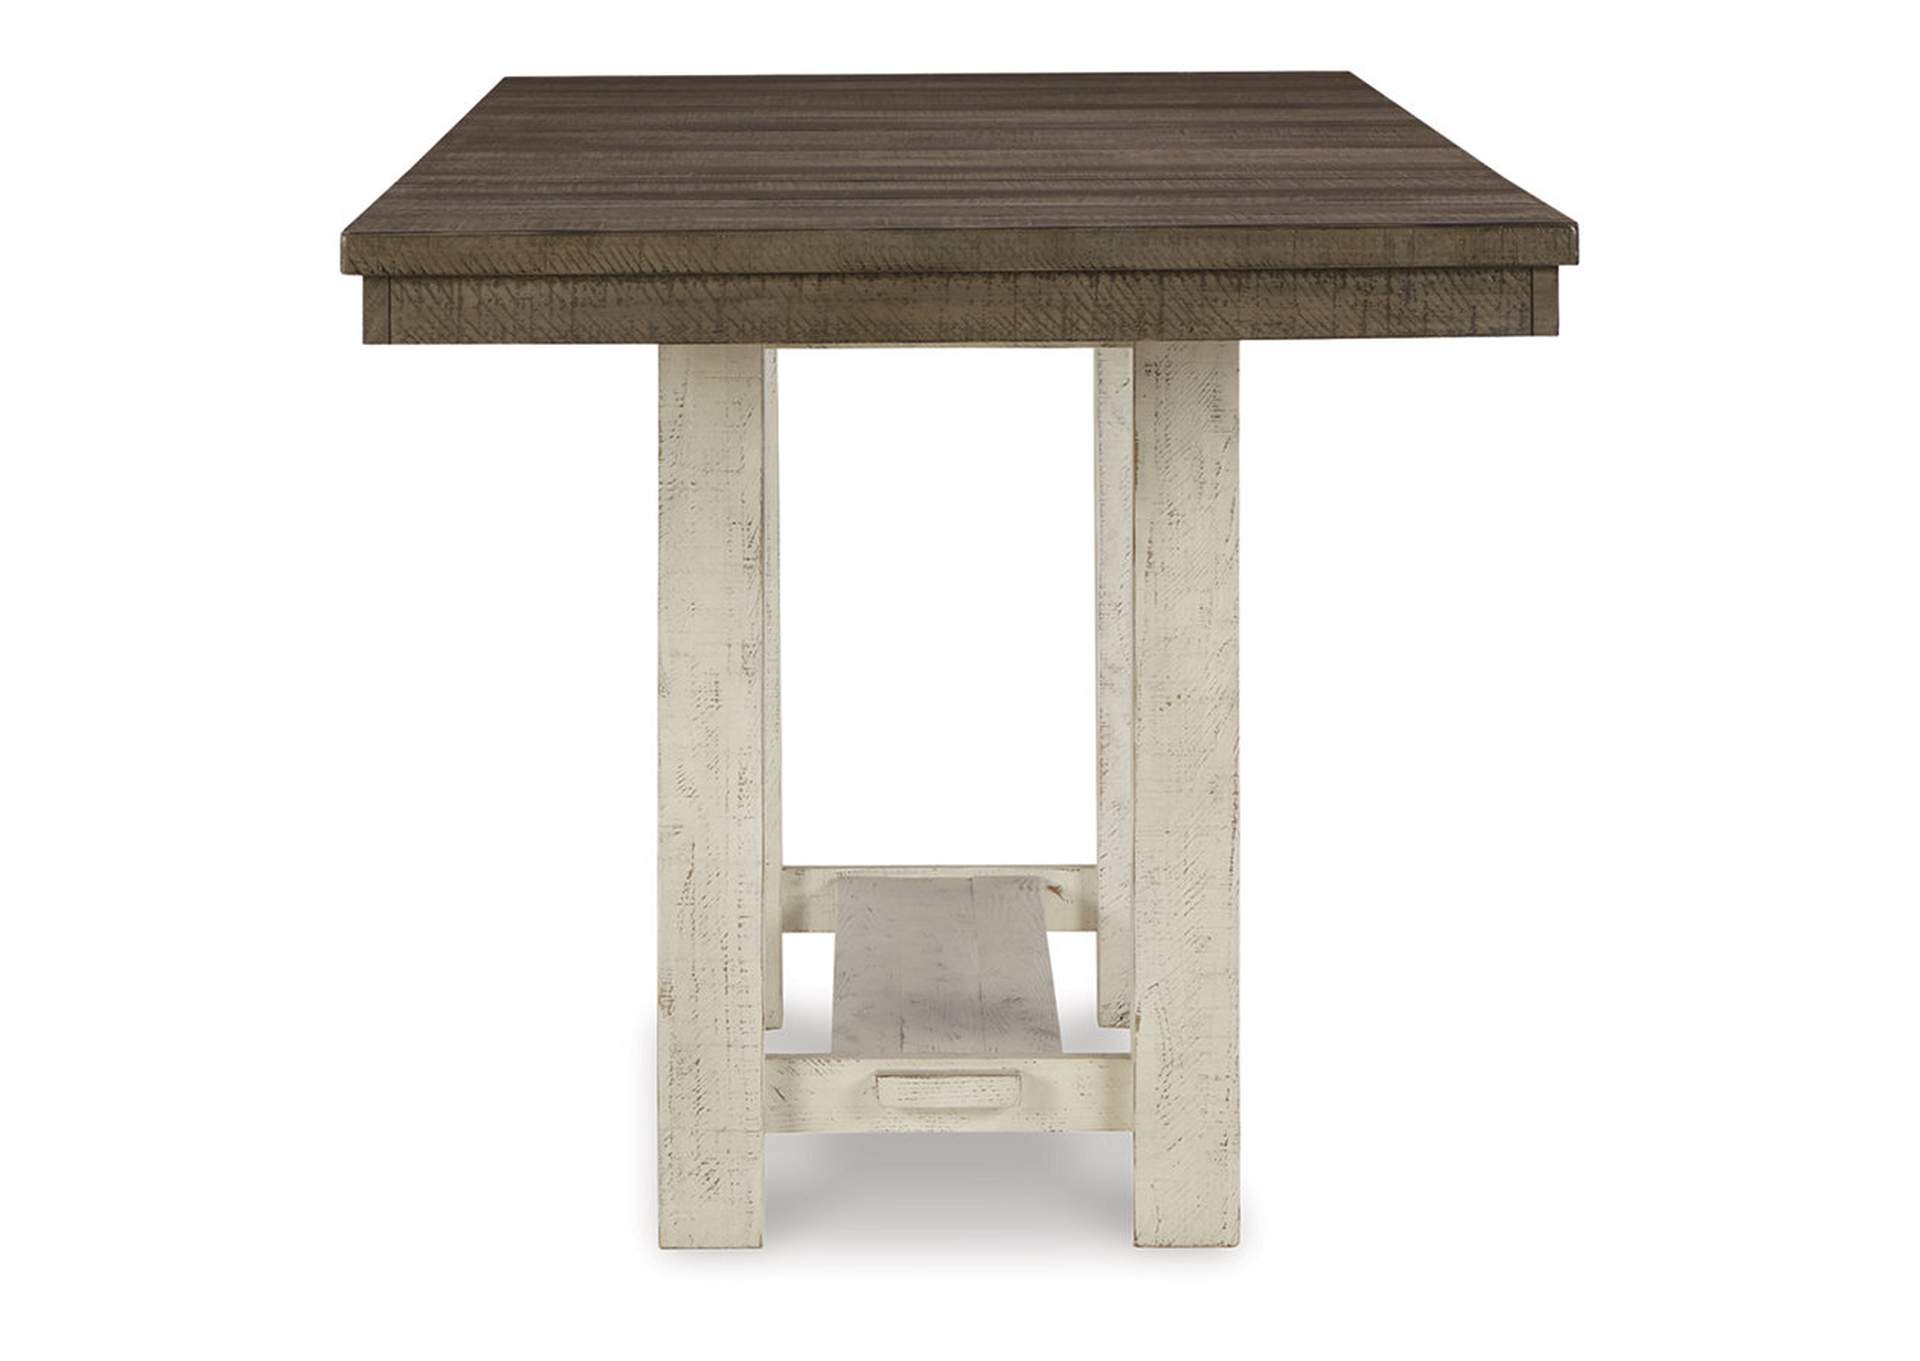 Brewgan Counter Height Dining Table,Benchcraft